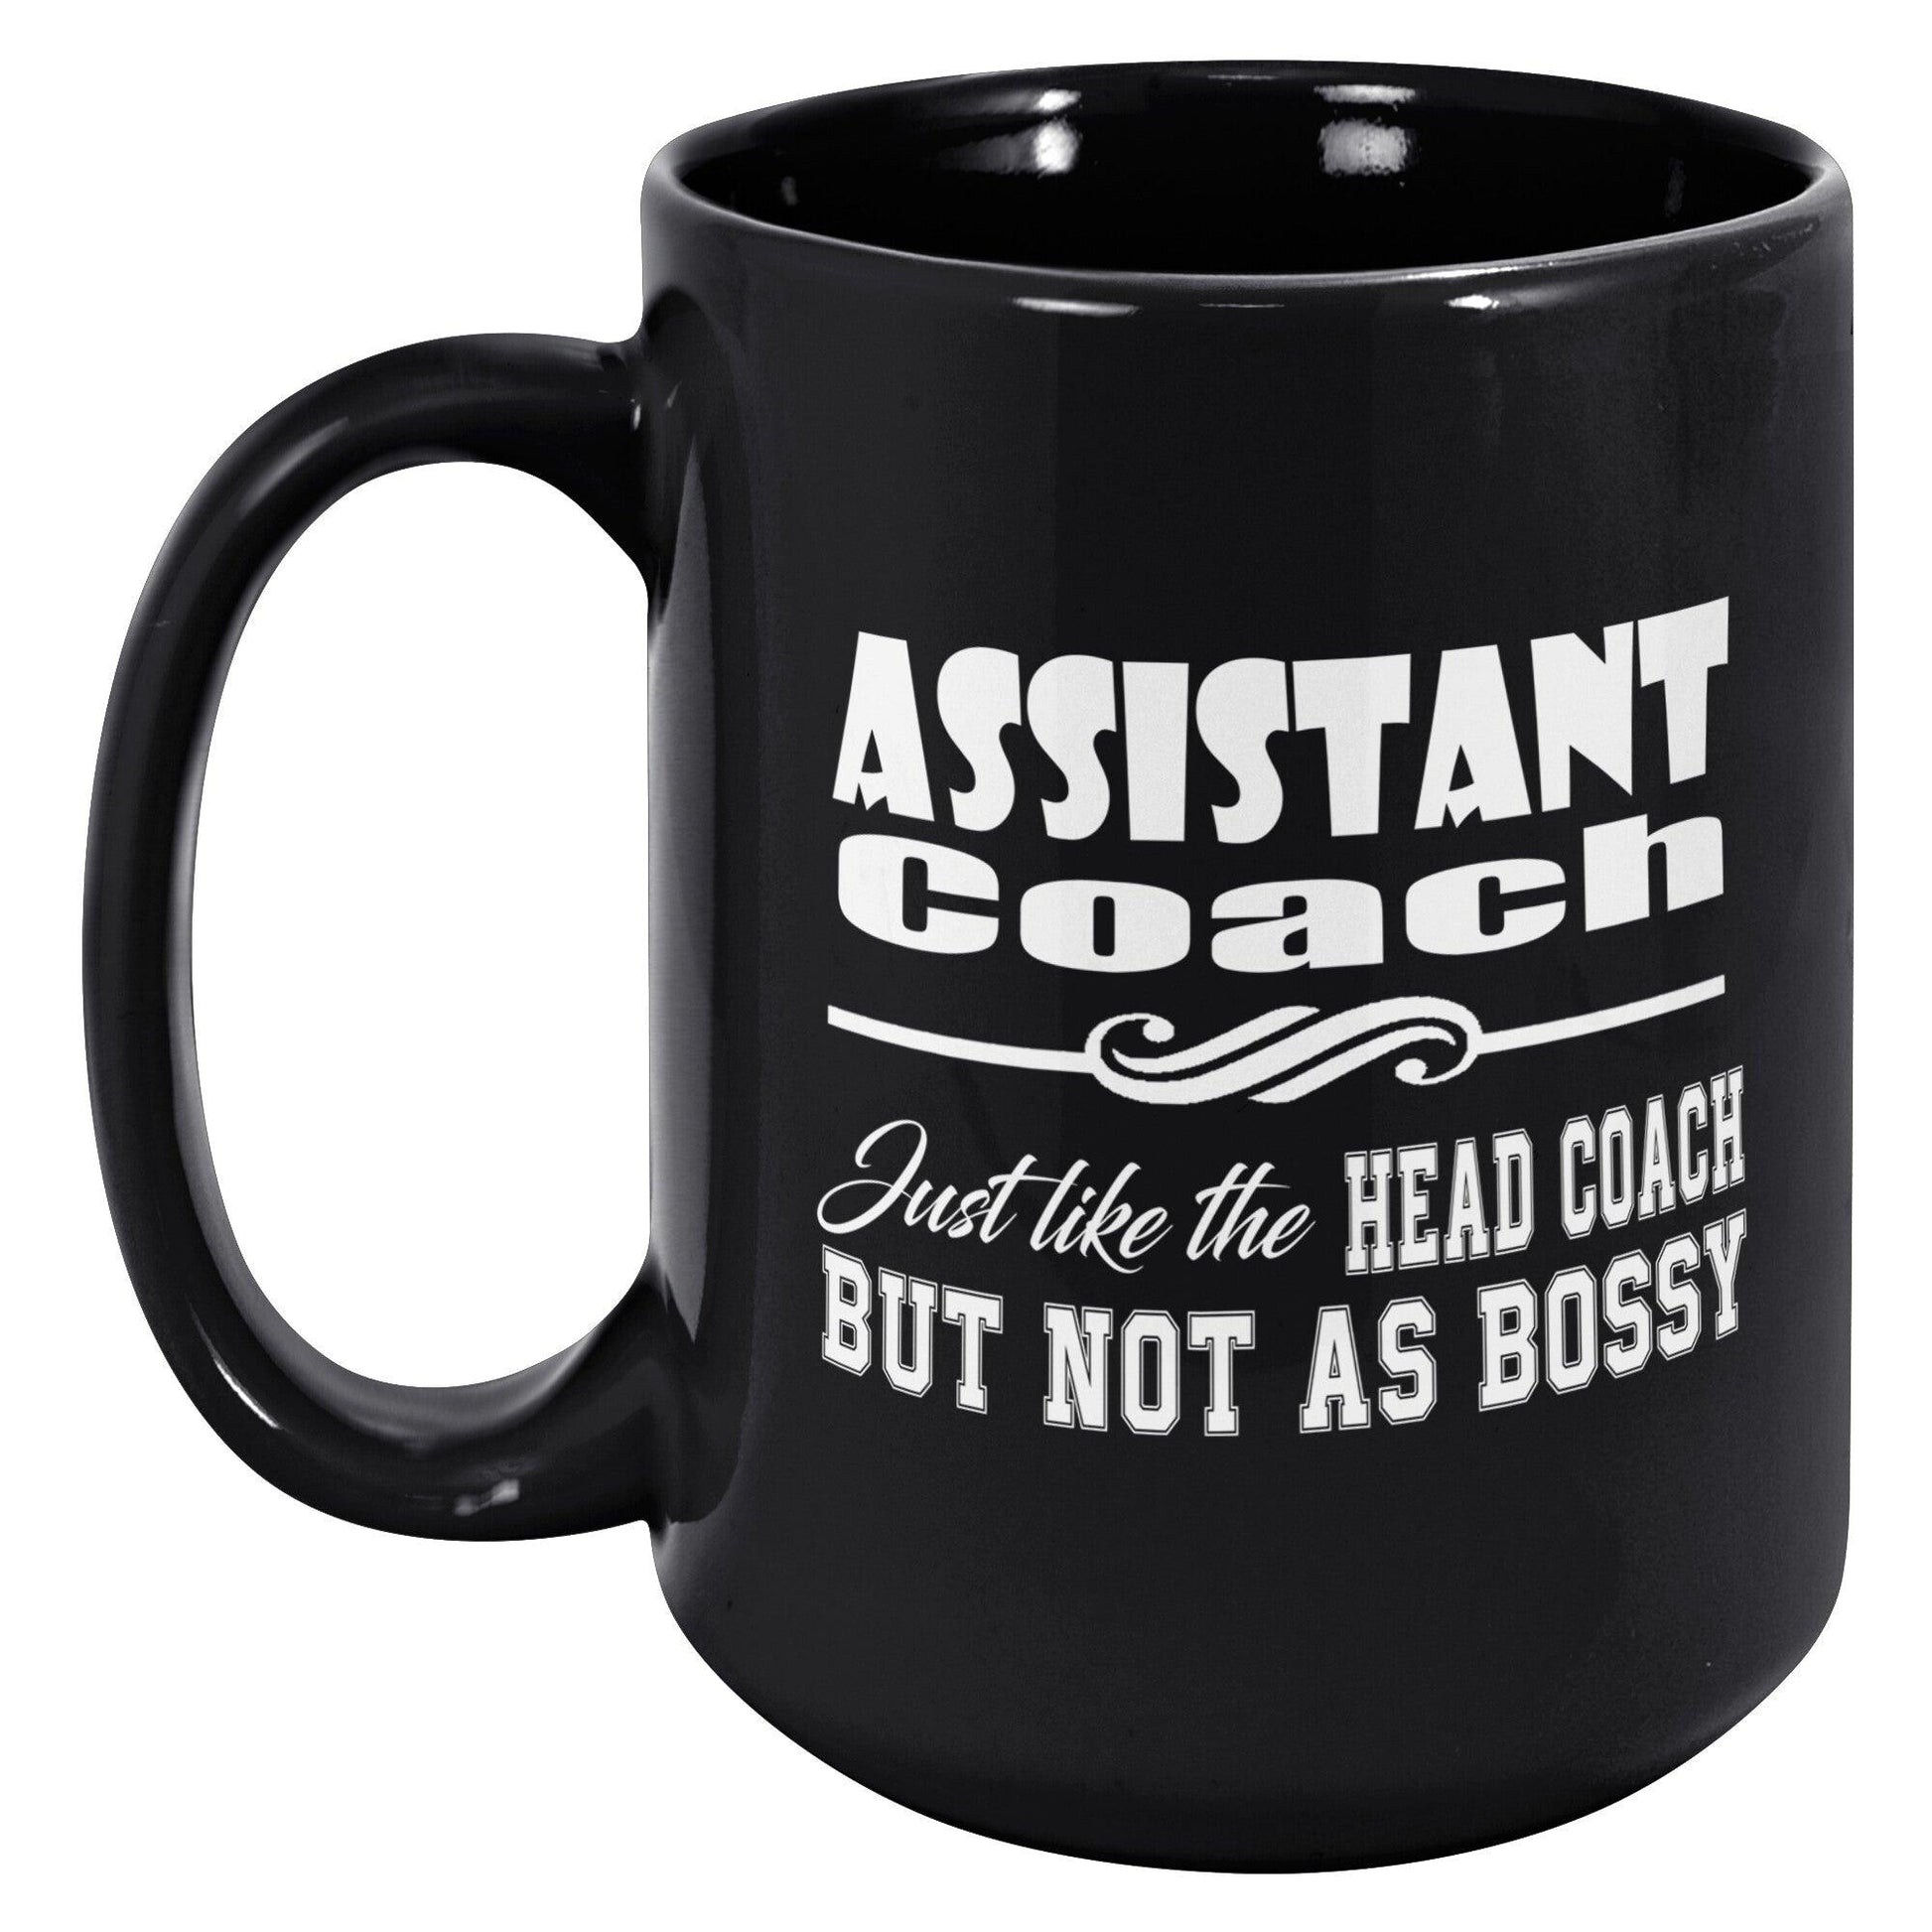 Assistant Coach! Just like the Head Coach but not as Bossy! Black Mug - TheGivenGet